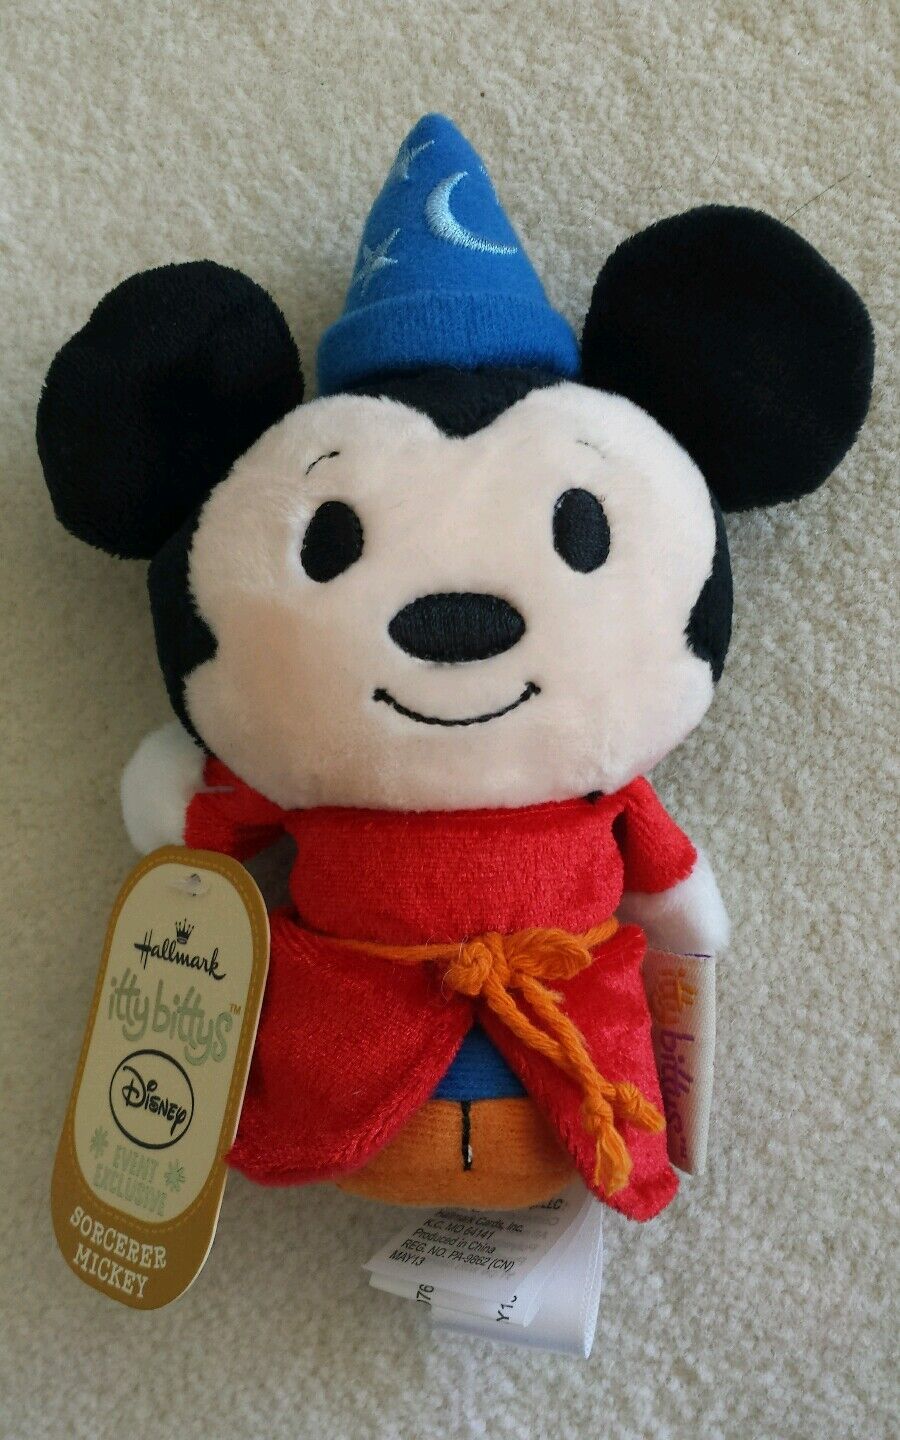 D23 2013 Disney EXPO Hallmark EXCLUSIVE ITTY BITTY PLUSH SORCERER MICKEY MOUSE